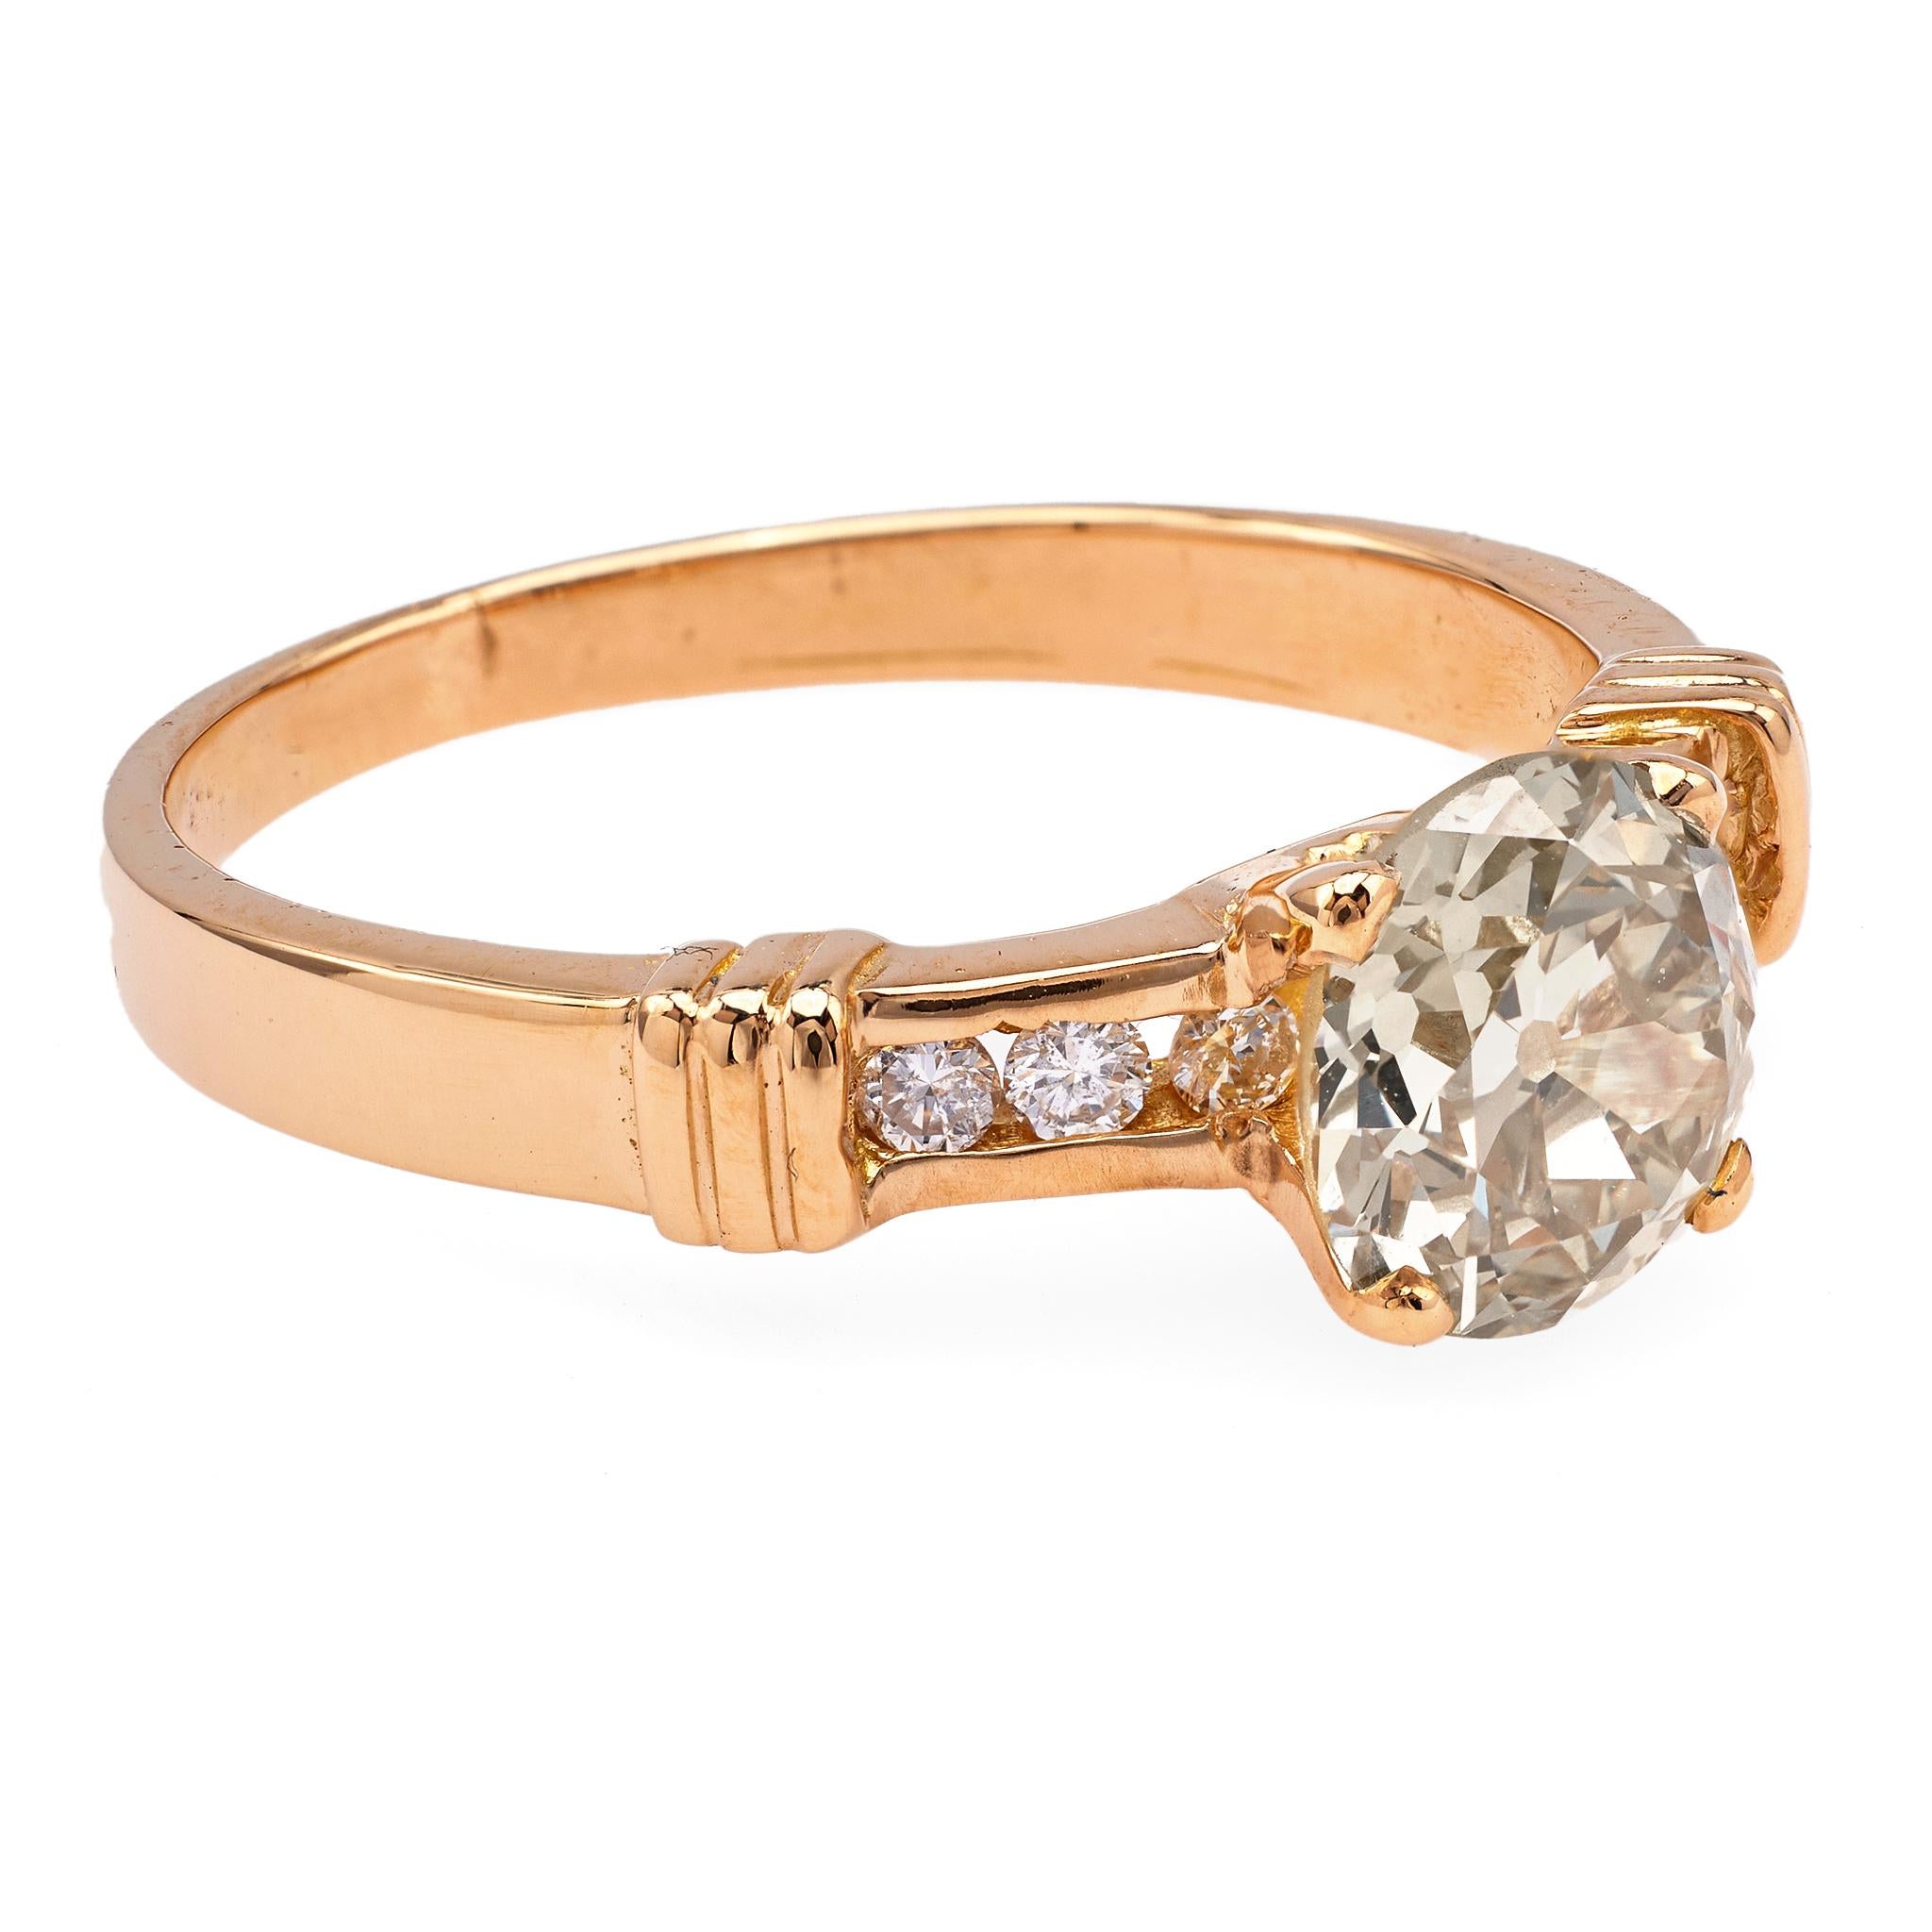 Women's or Men's Vintage French GIA 1.21 Carat Fancy Color Diamond 18k Yellow Gold Ring For Sale